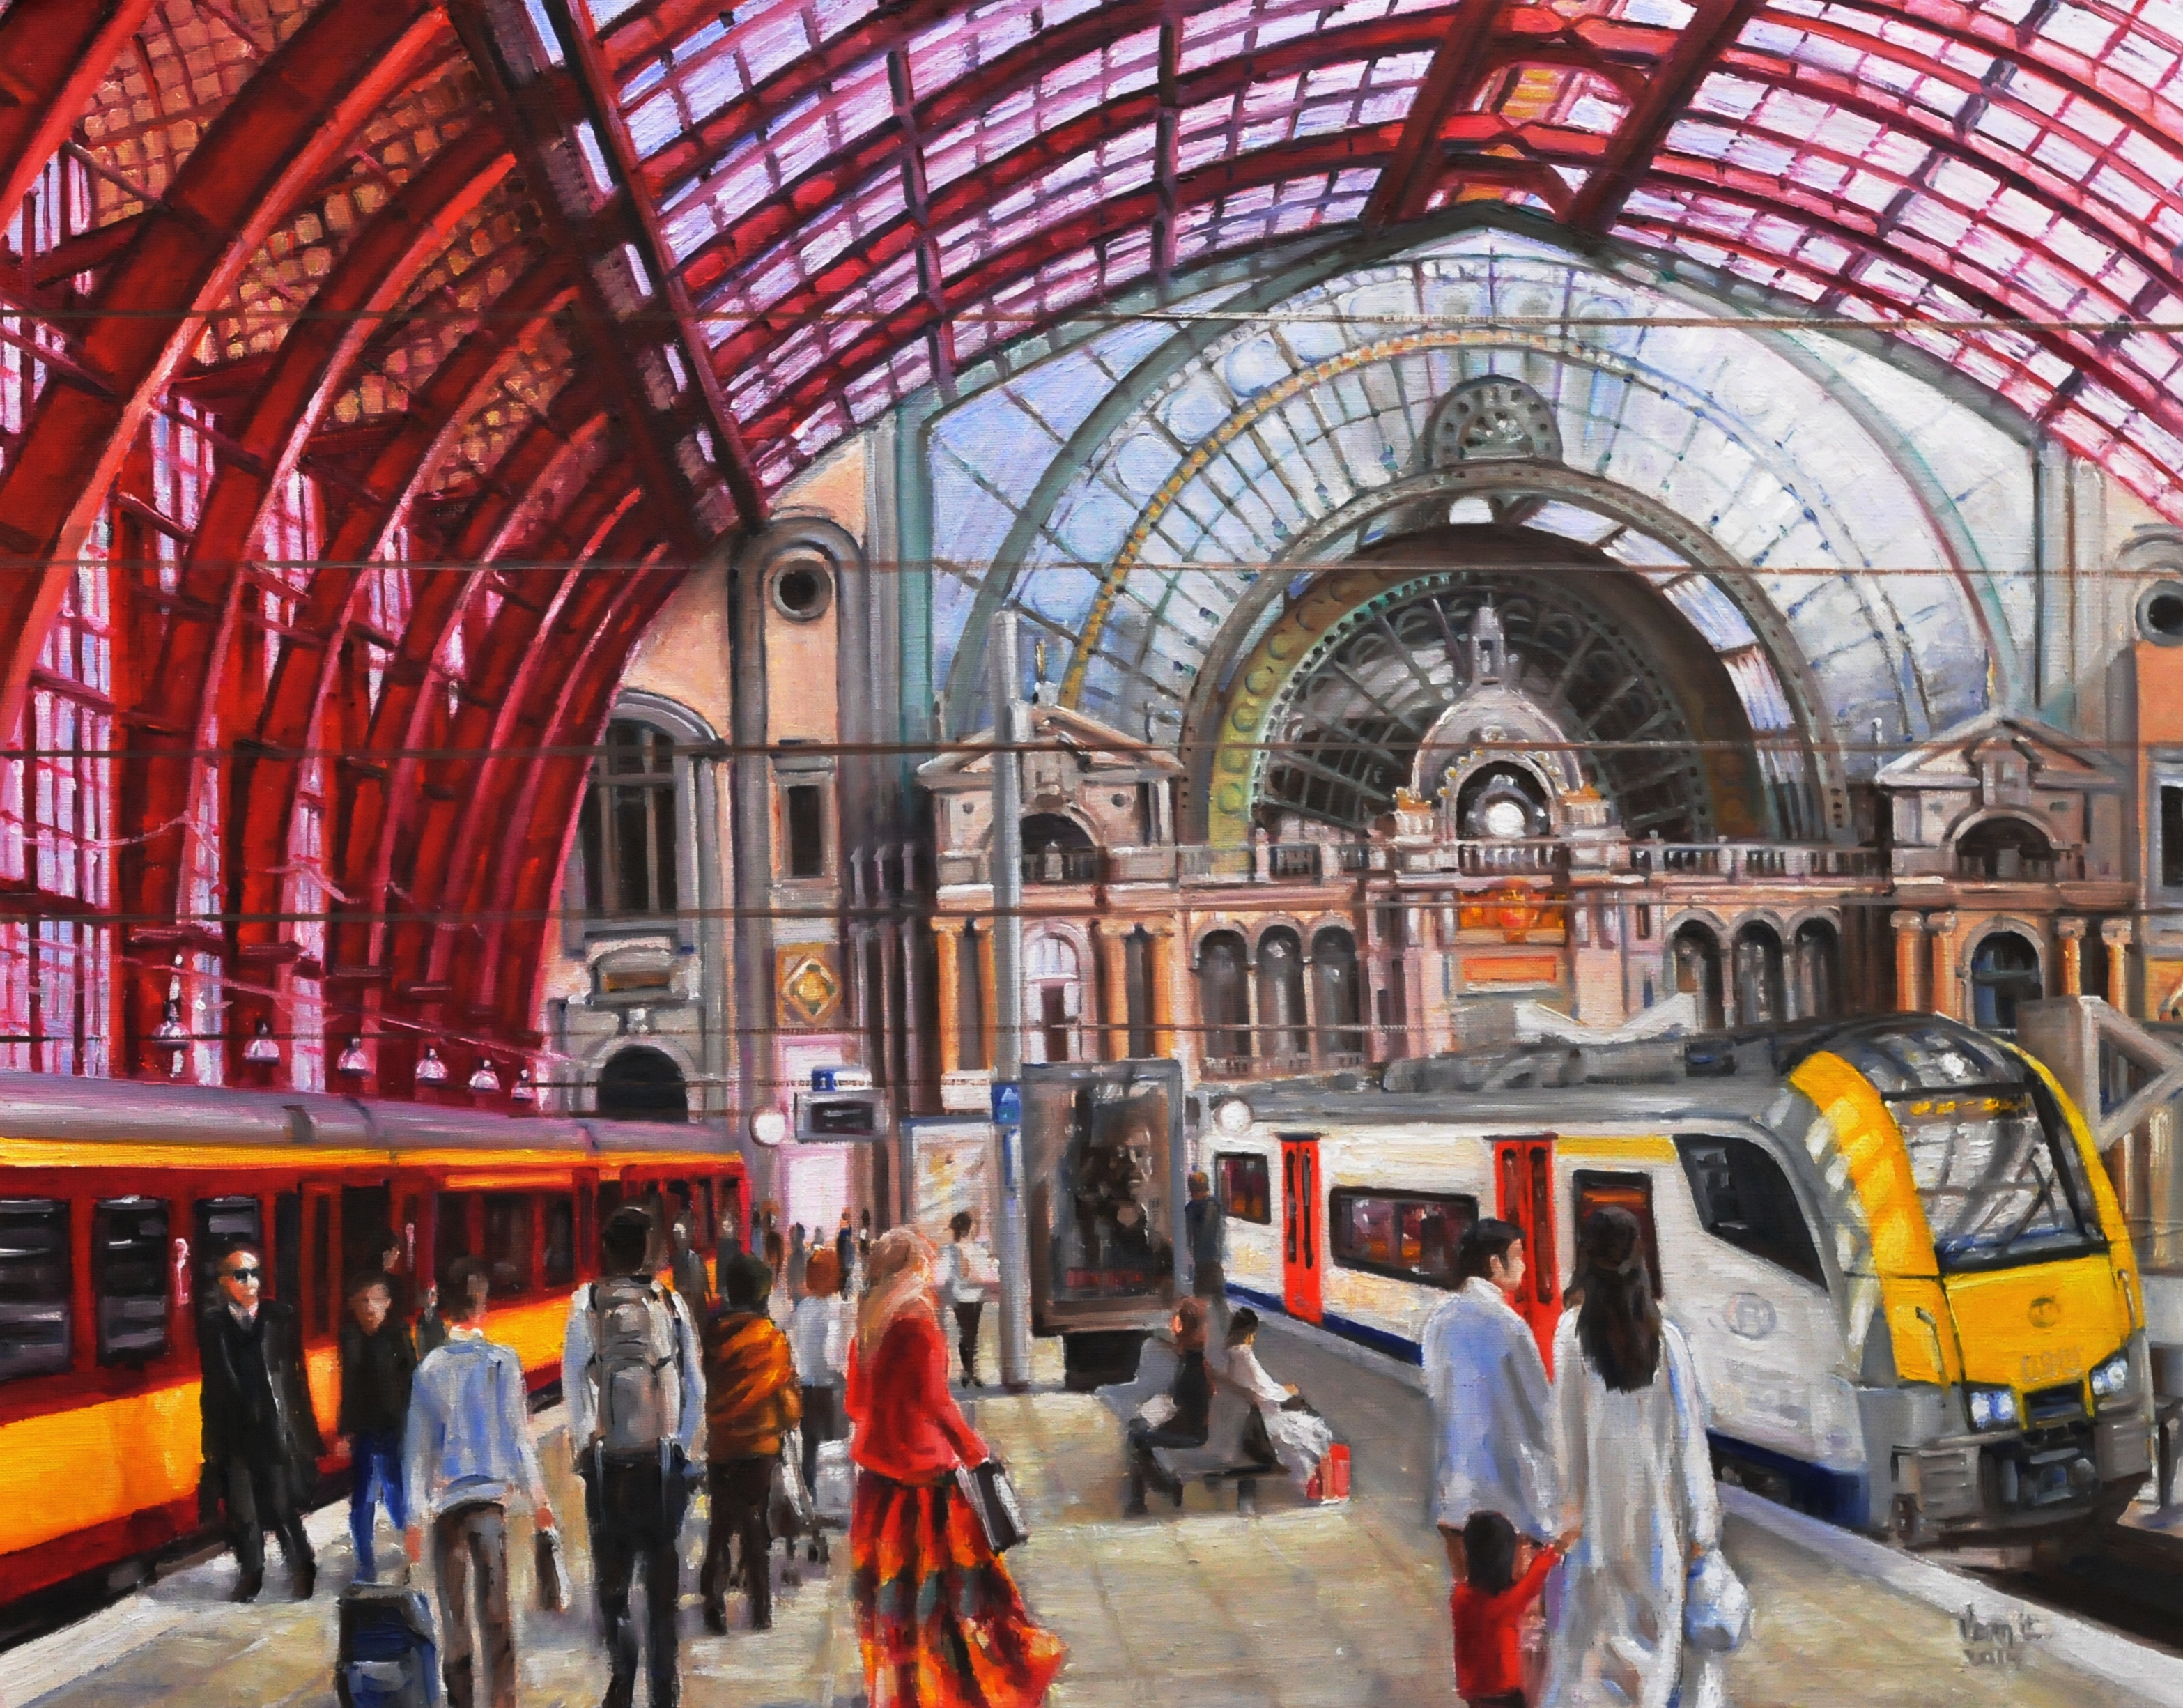 Antwerp Central Station interior | Oil on linen | Year: 2014 | Dimensions: 80x90cm